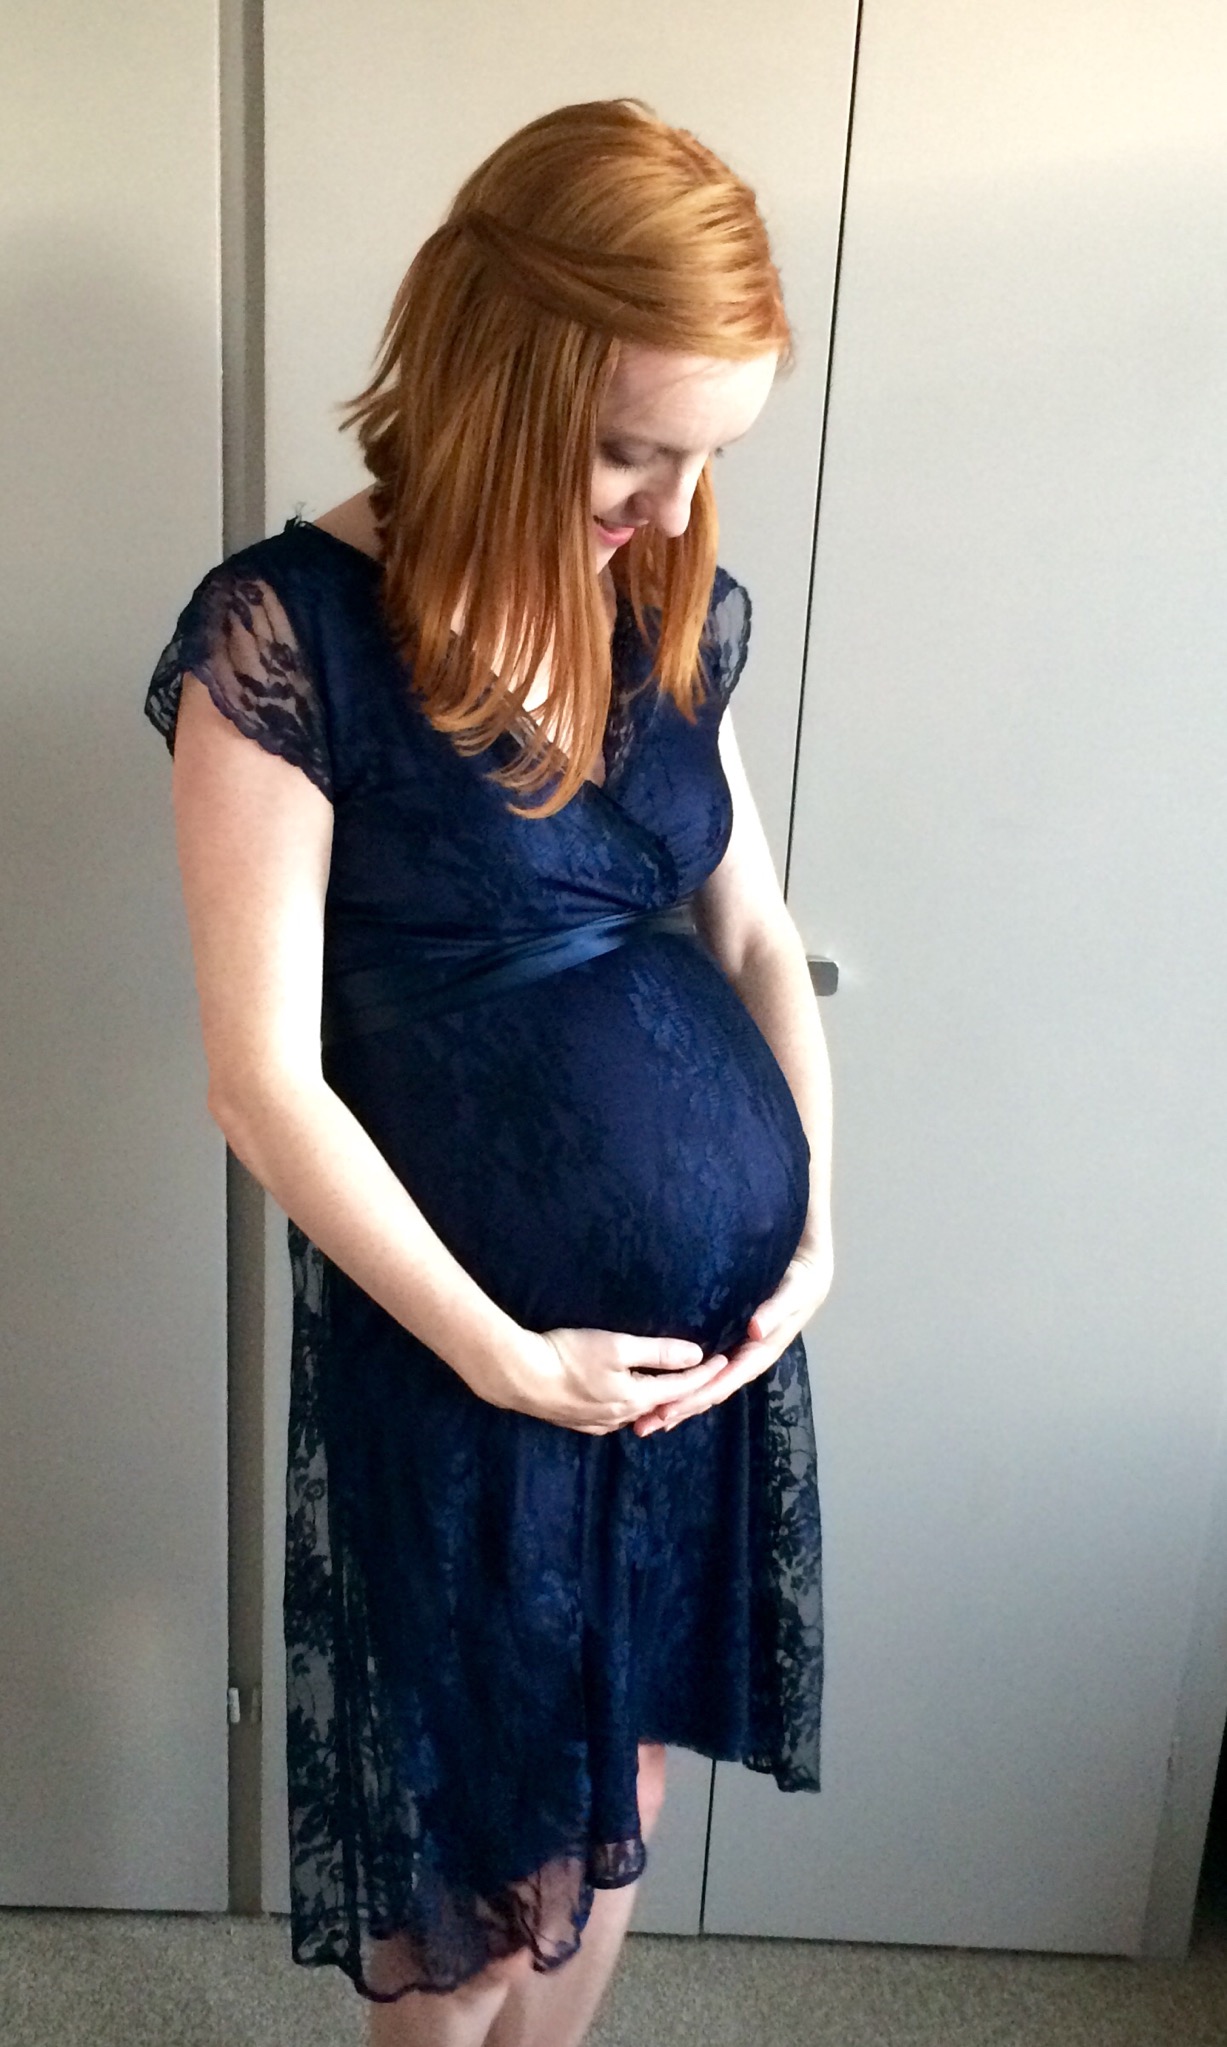 Maternity dresses for weddings - Tiffany Rose review 